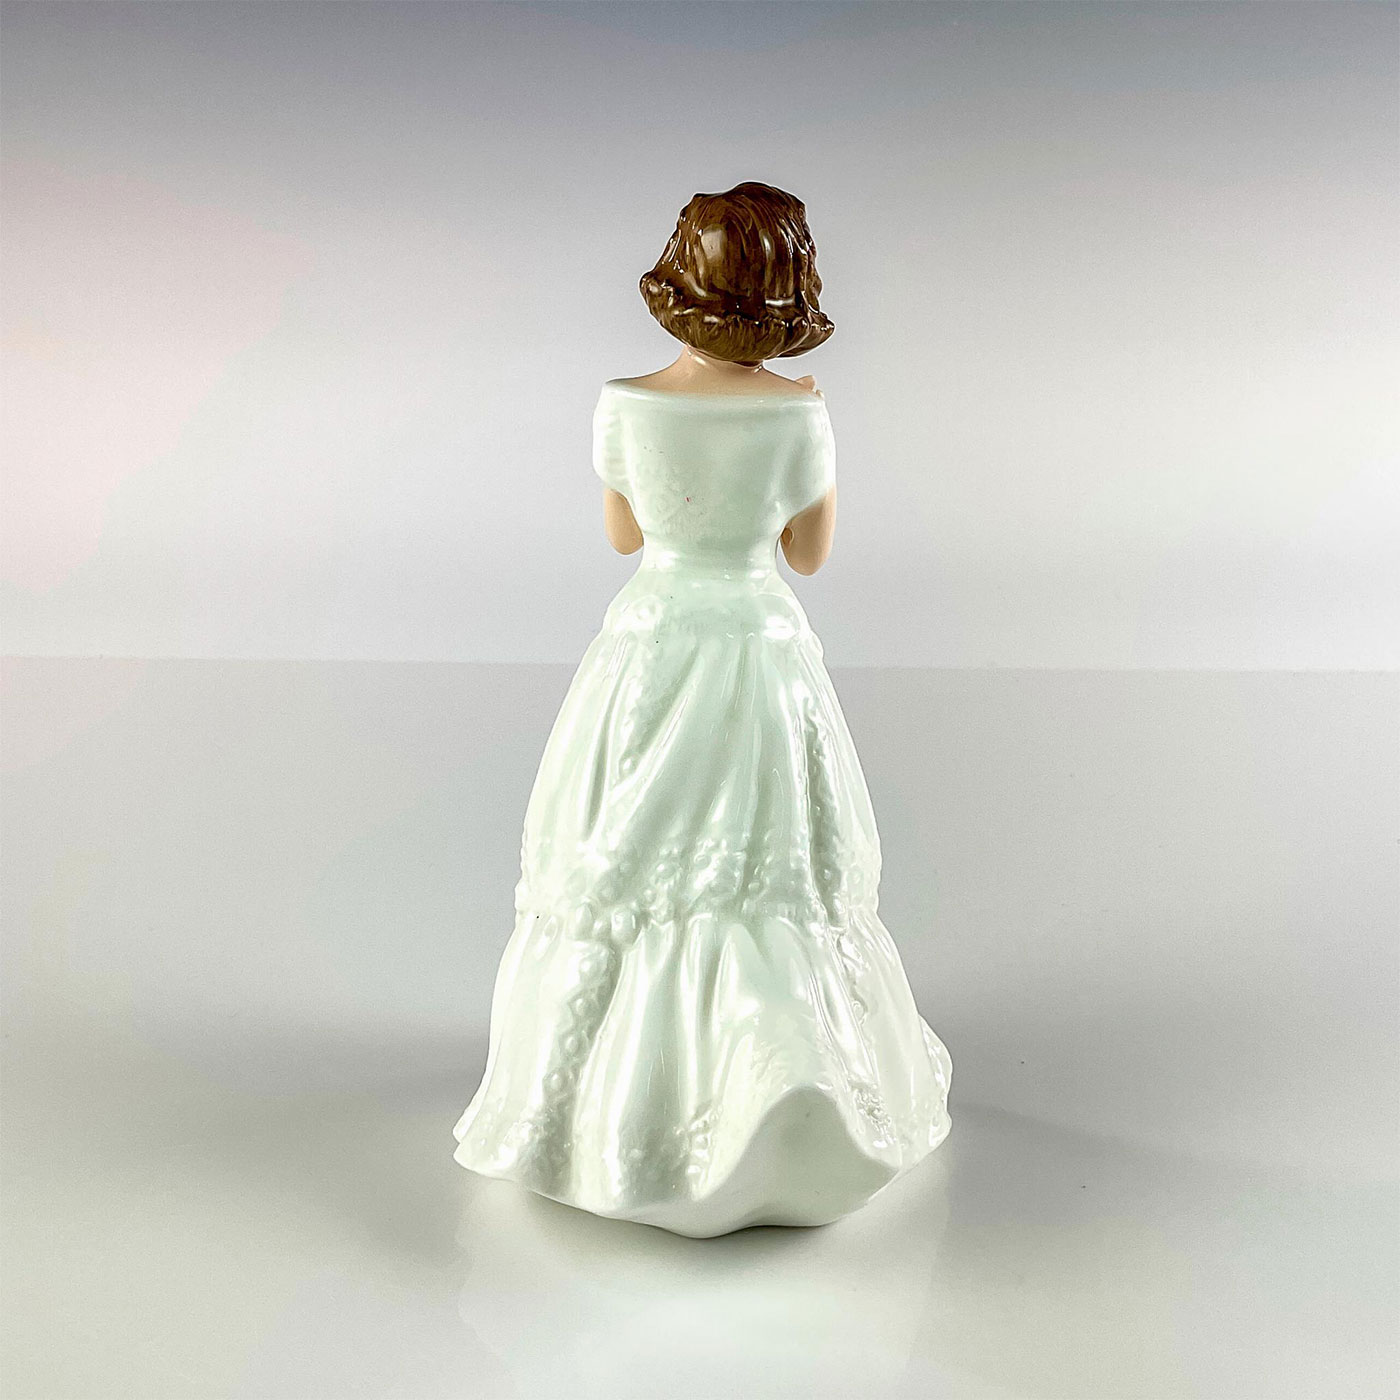 Welcome HN3764 - Royal Doulton Figurine - Image 2 of 3